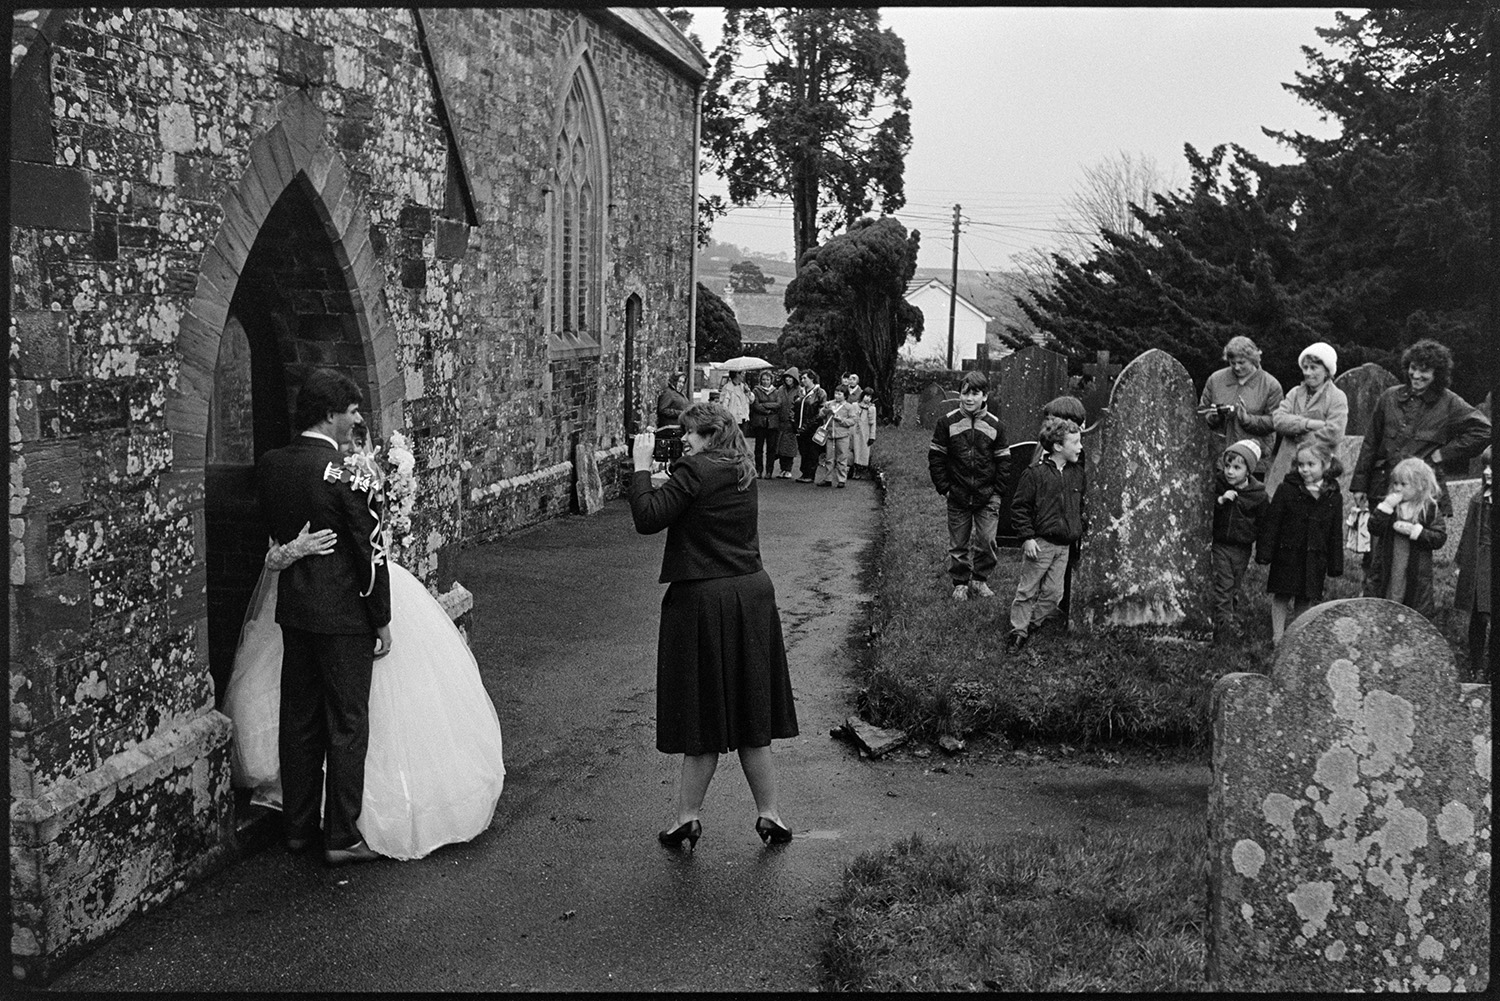 Bride, groom and guests outside church after wedding, photographer. 
[A woman photographing or videoing a bride and groom outside Dolton Church after their wedding. They are stood at the entrance to the church. Wedding guests and onlookers are watching in the background.]